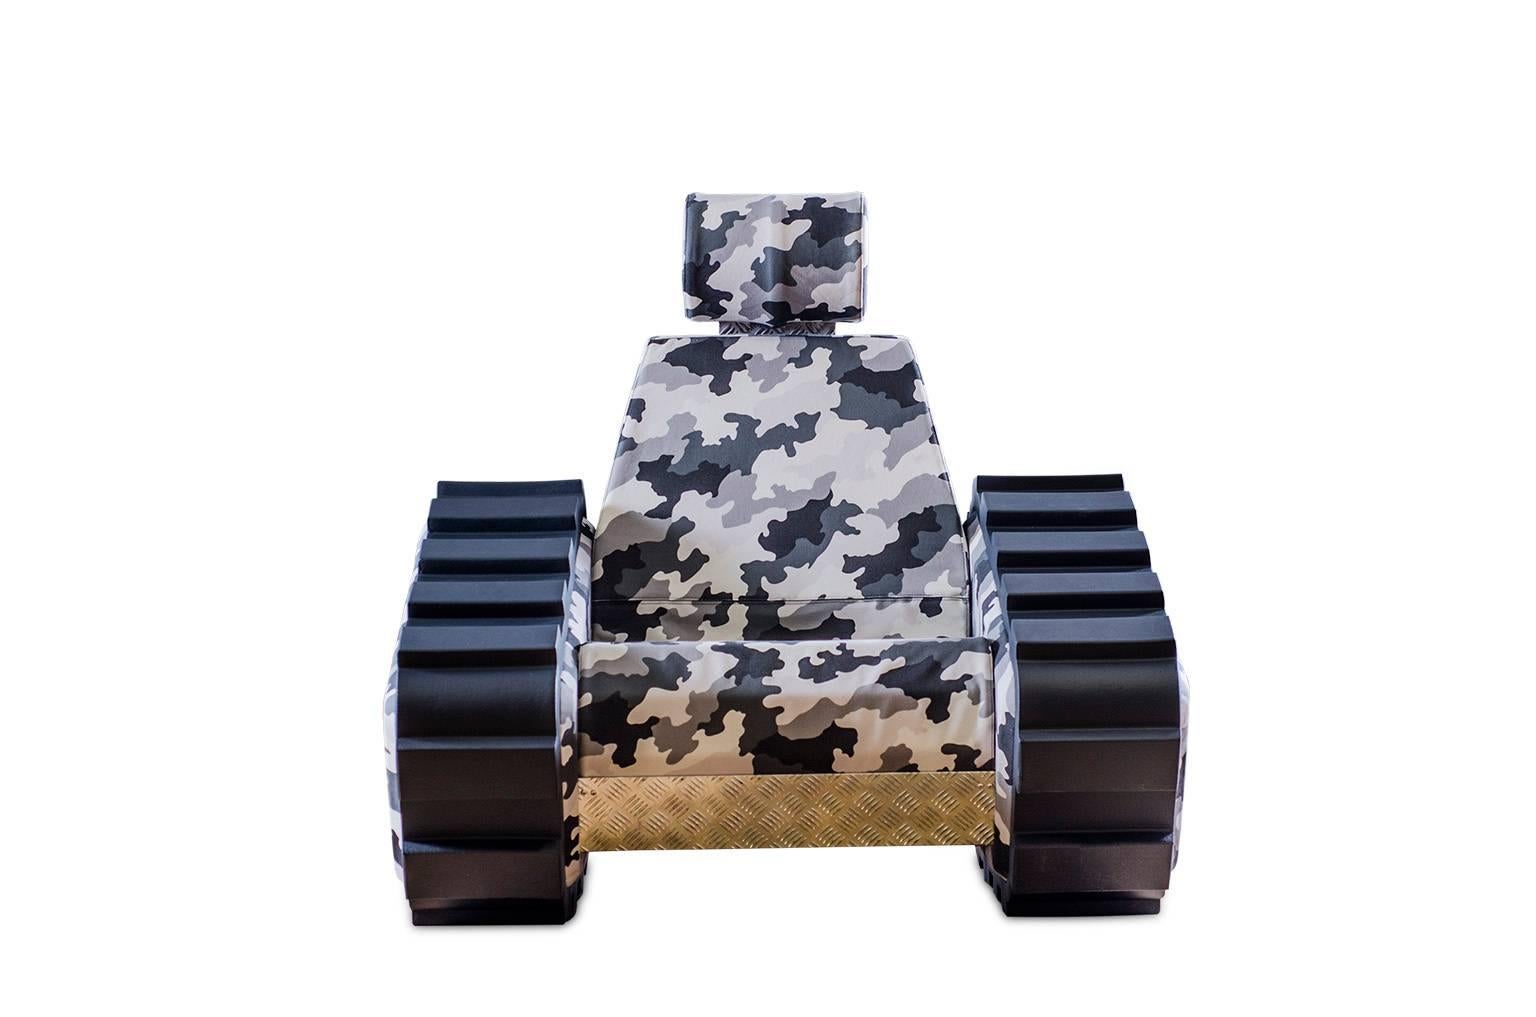 The military symbols turn in to peace messages.
An harmless tank that loose his war instinct, that in a funny way become a big cozy seat.
Three versions of the Armrest and Girdle personalize the Armychair, for the best expression, of the